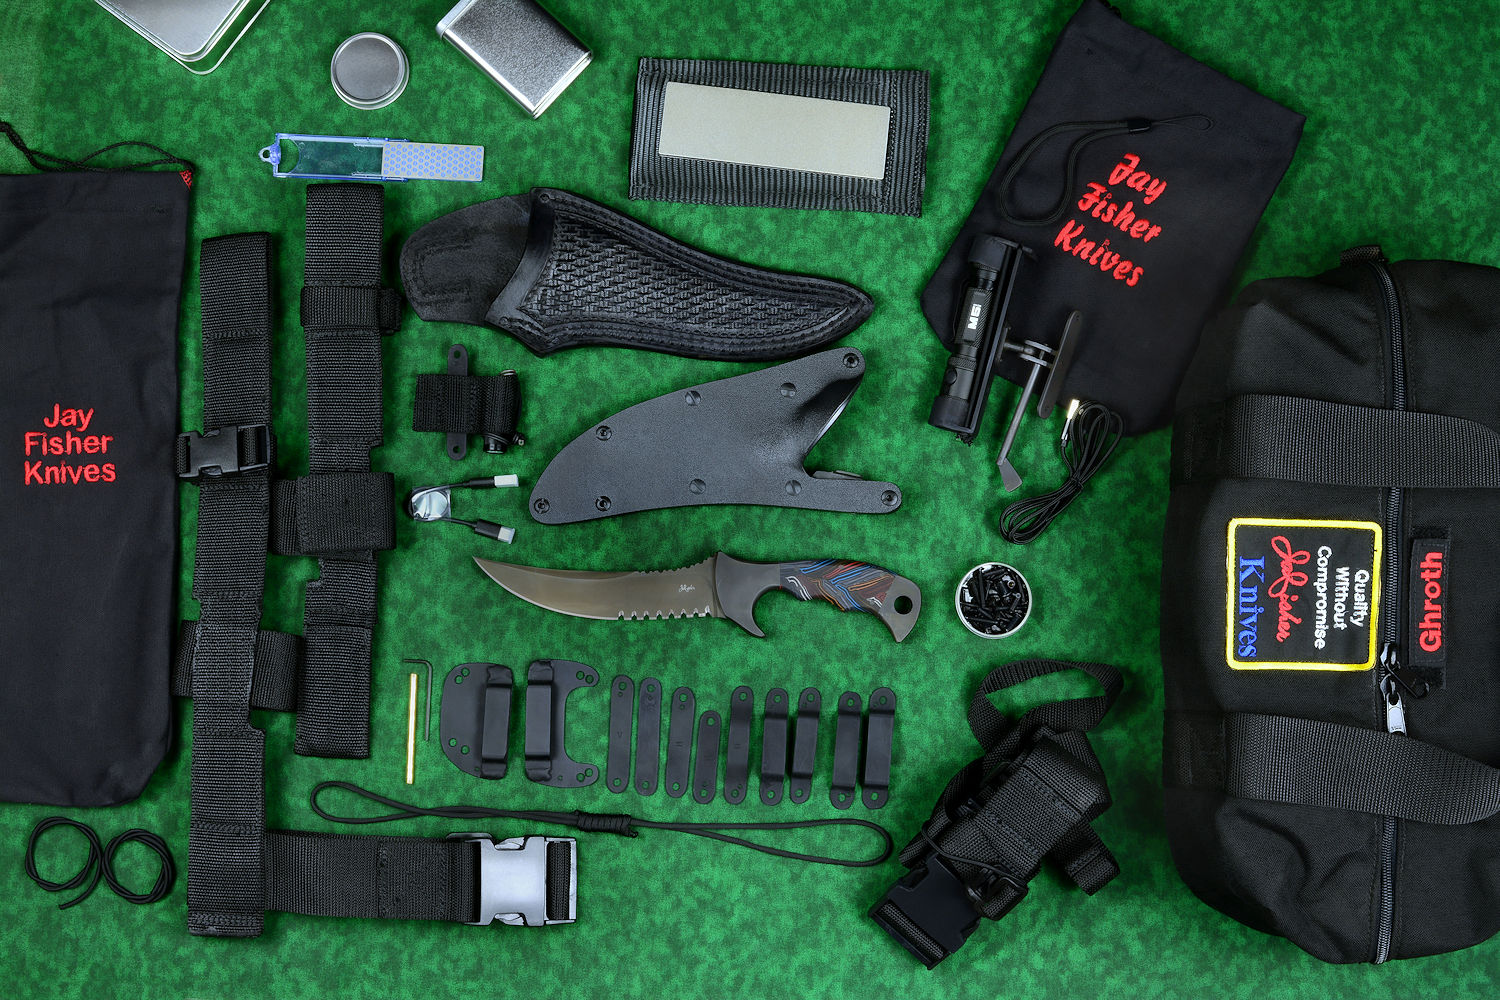 "Ghroth" tactical knife kit, complete, with UBLX, EXBLX, HULA, LIMA, diamond sharpener, leather sheath, sternum harness, lanyards, staps, clamps, hardware, and heavy ballistic nylon duffle